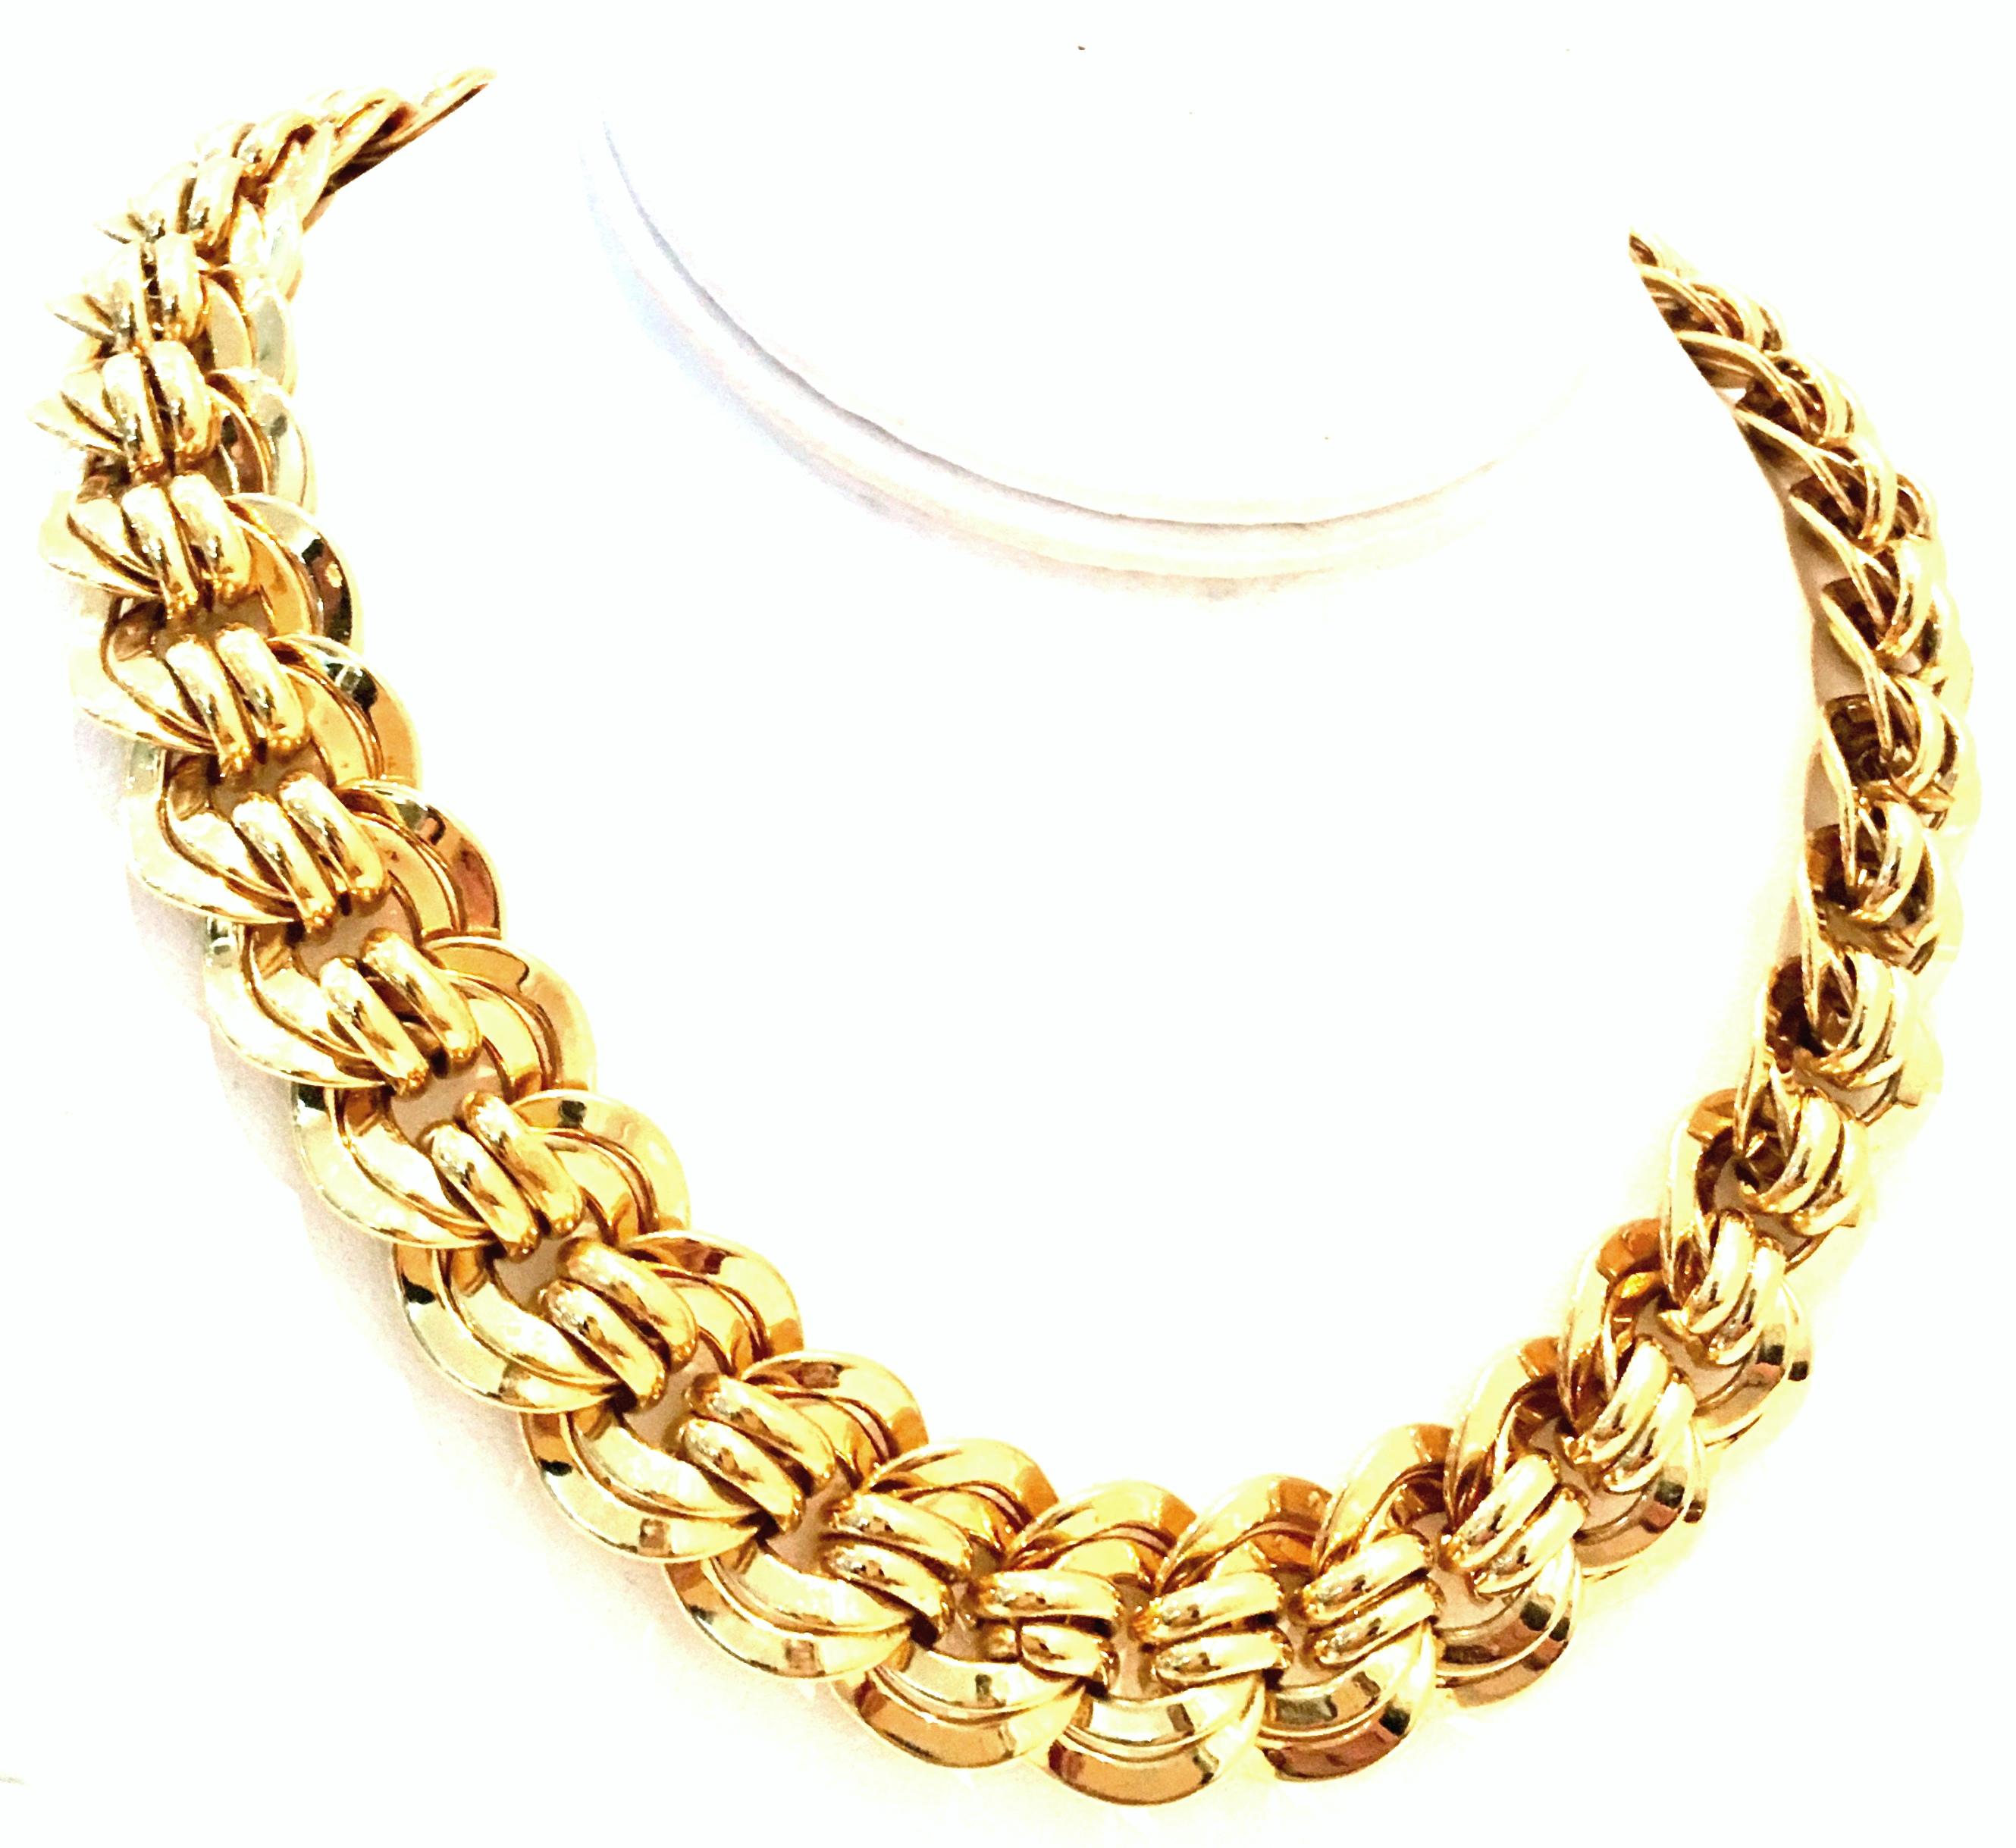 20th Century Gold Plate Chain Link Choker Style Necklace By, Napier. Features a substantially weighted gold plate rope and twist chain link design. Signed on the fold over box style clasp, Napier